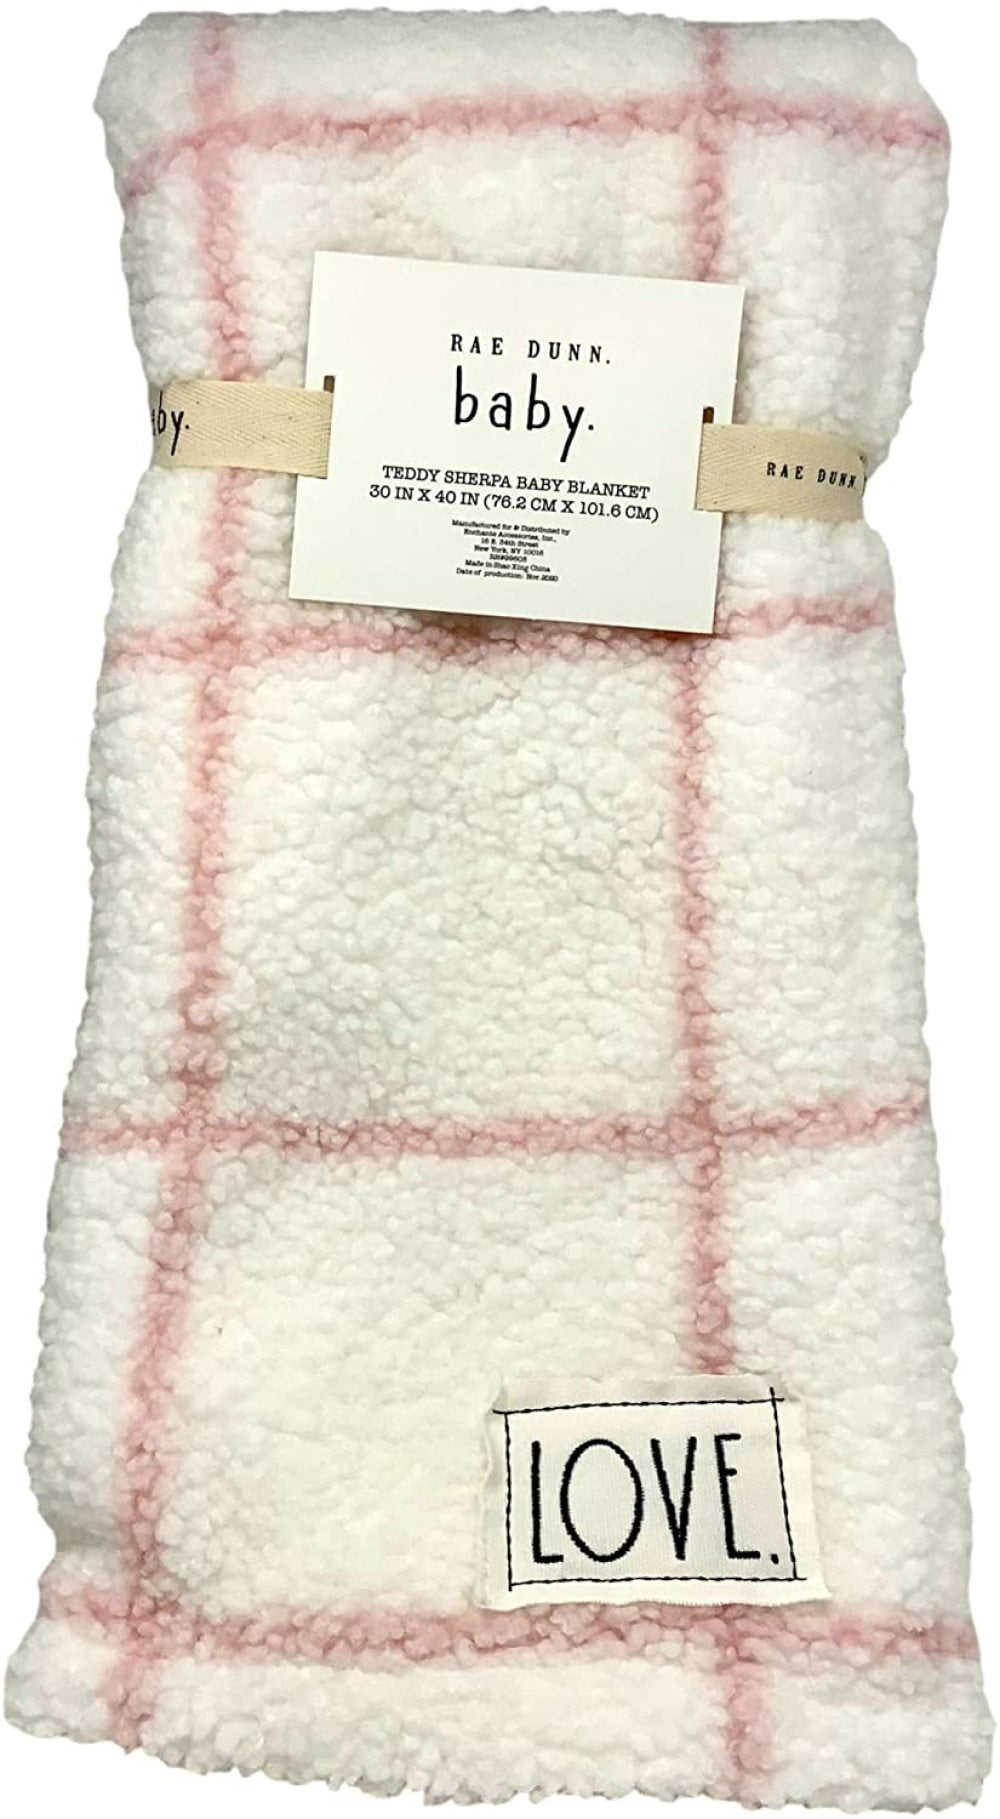 RAE Dunn Baby Blanket with Love Patch - Sherpa. Soft Plush Baby Throw -  Soothing Relaxing Snuggle Soft to Cocoon or Swaddle Baby. White with Pink  Stripes and Love Patch. - Walmart.com